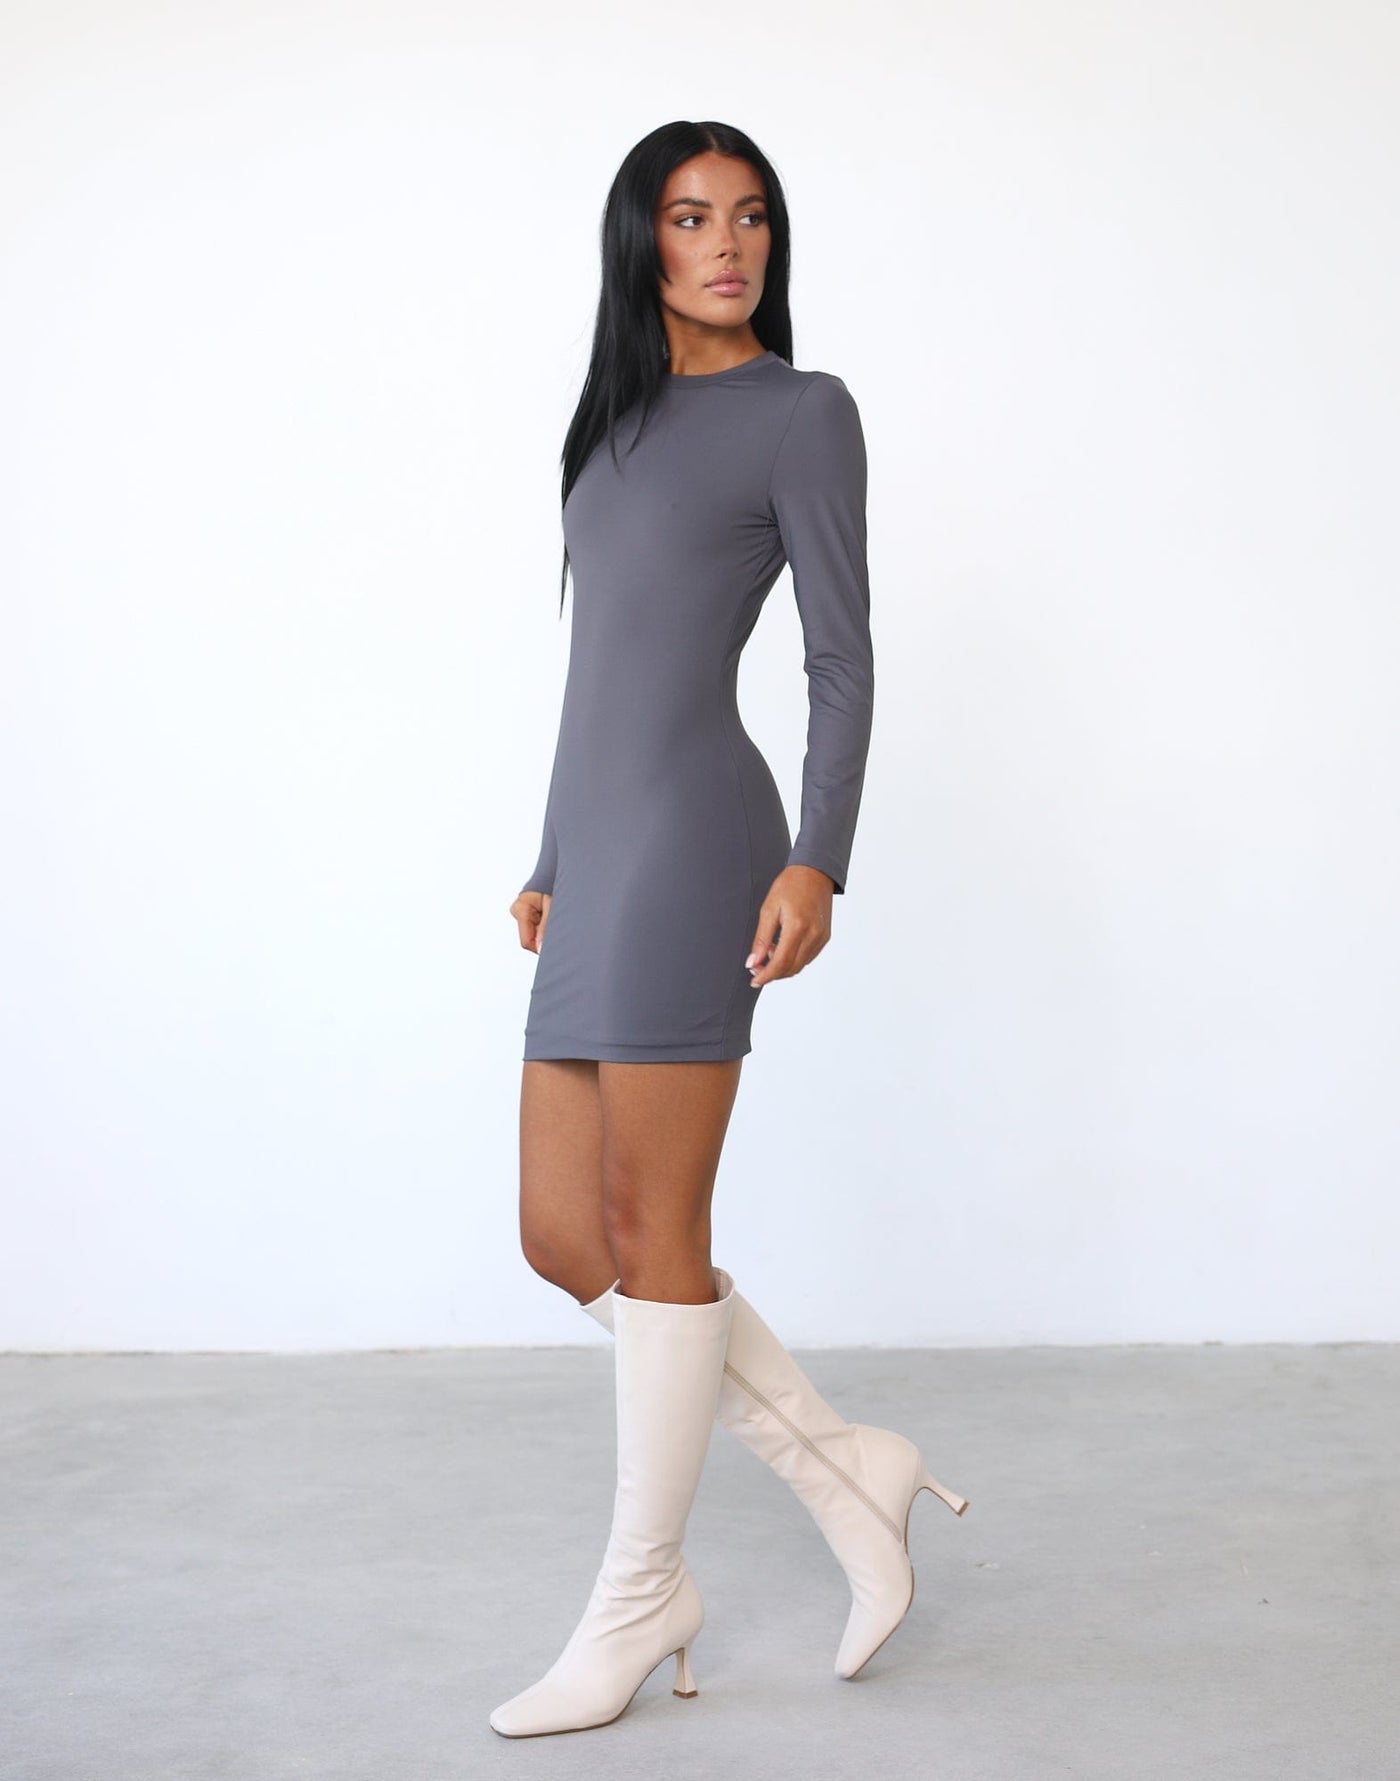 Alliyah Long Sleeve Mini Dress (Charcoal) - Fitted Round Neck Mini Dress - Women's Dress - Charcoal Clothing